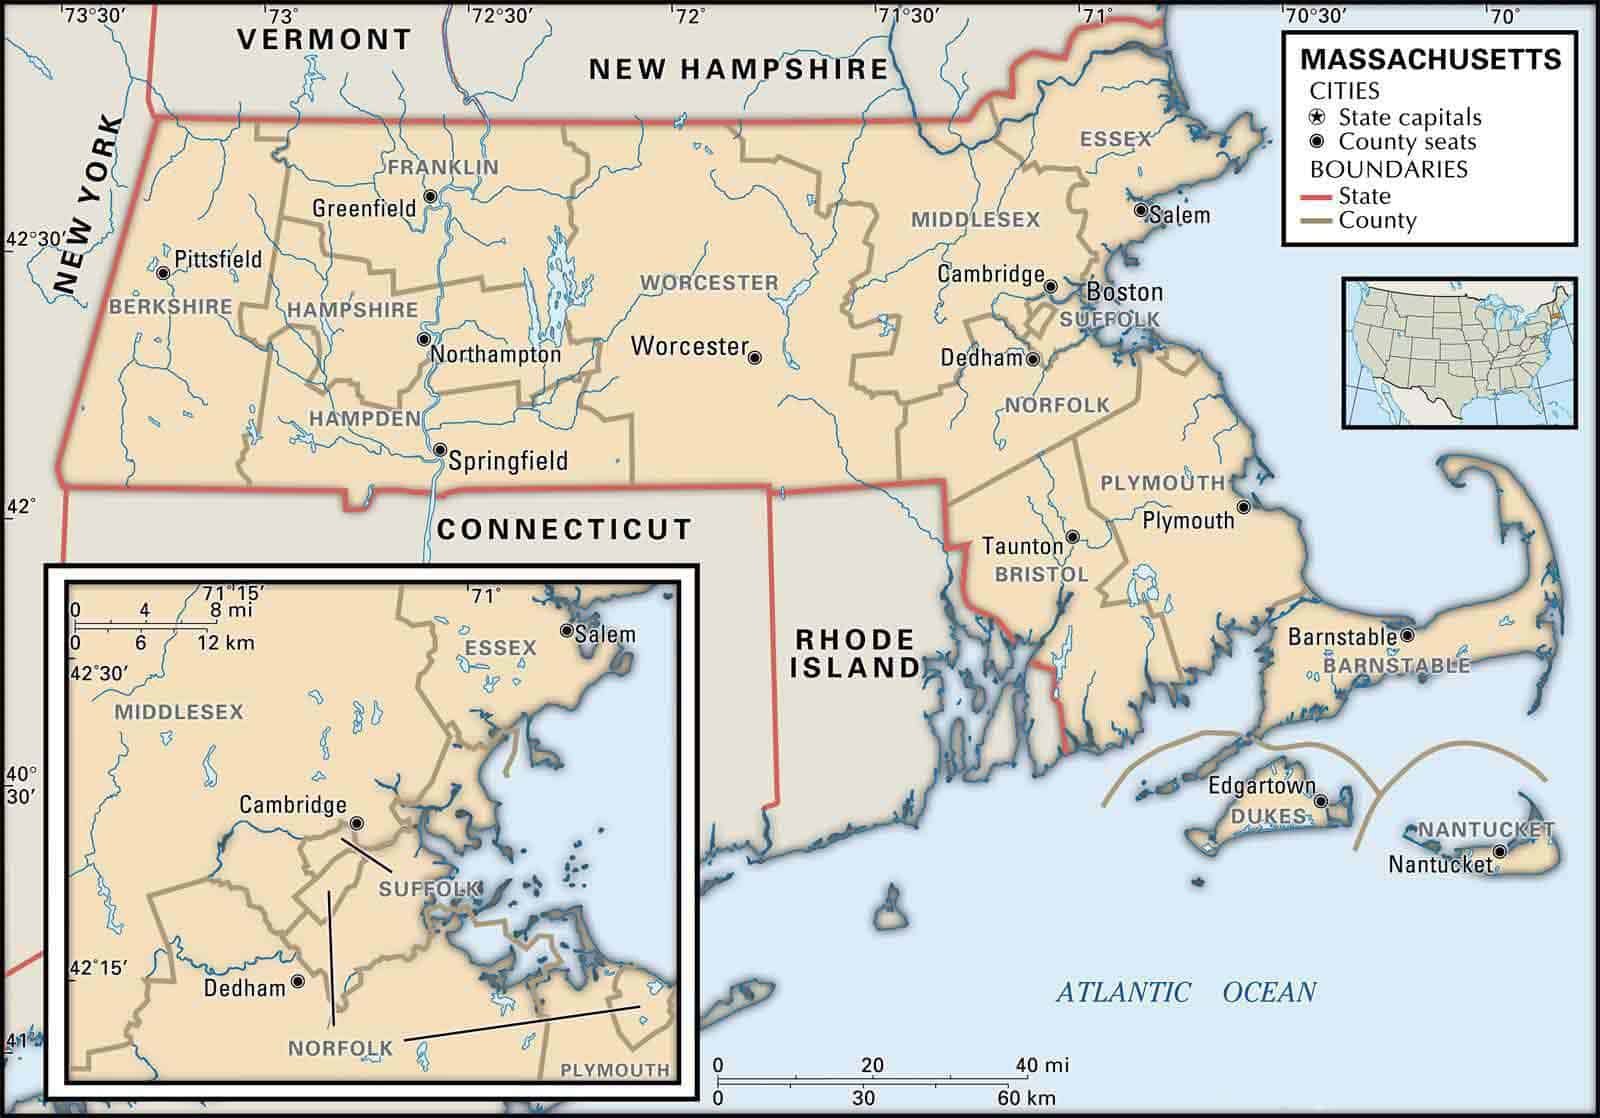 Massachusetts County Map Of Boundaries And County Seats 